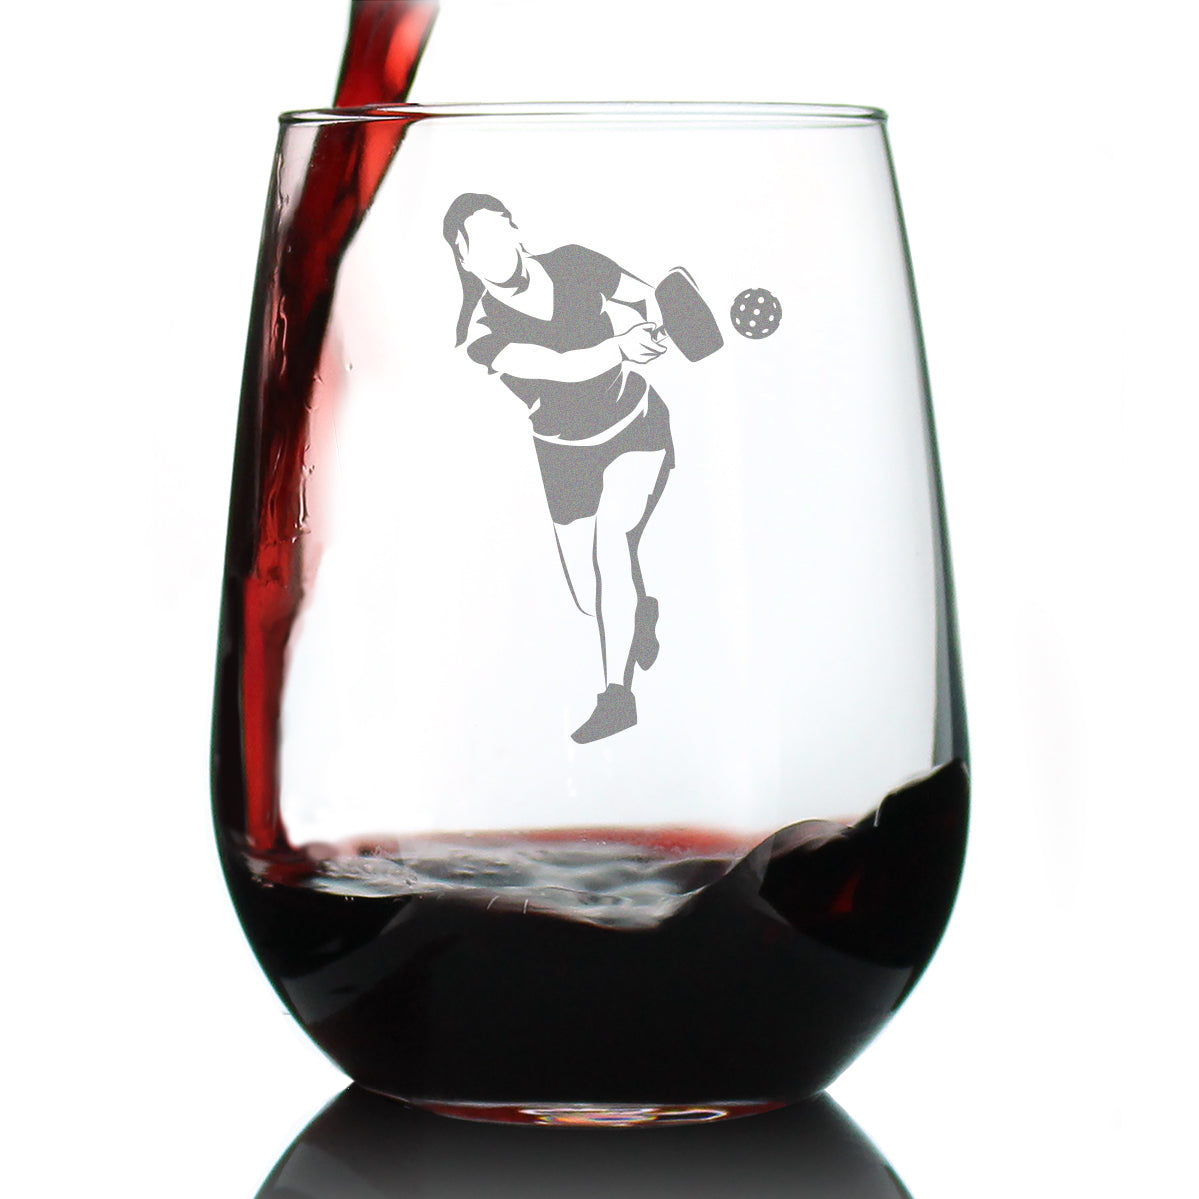 Pickleball Player Female - Stemless Wine Glass - Funny Pickleball Themed Decor and Gifts - Large 17 Oz Glasses